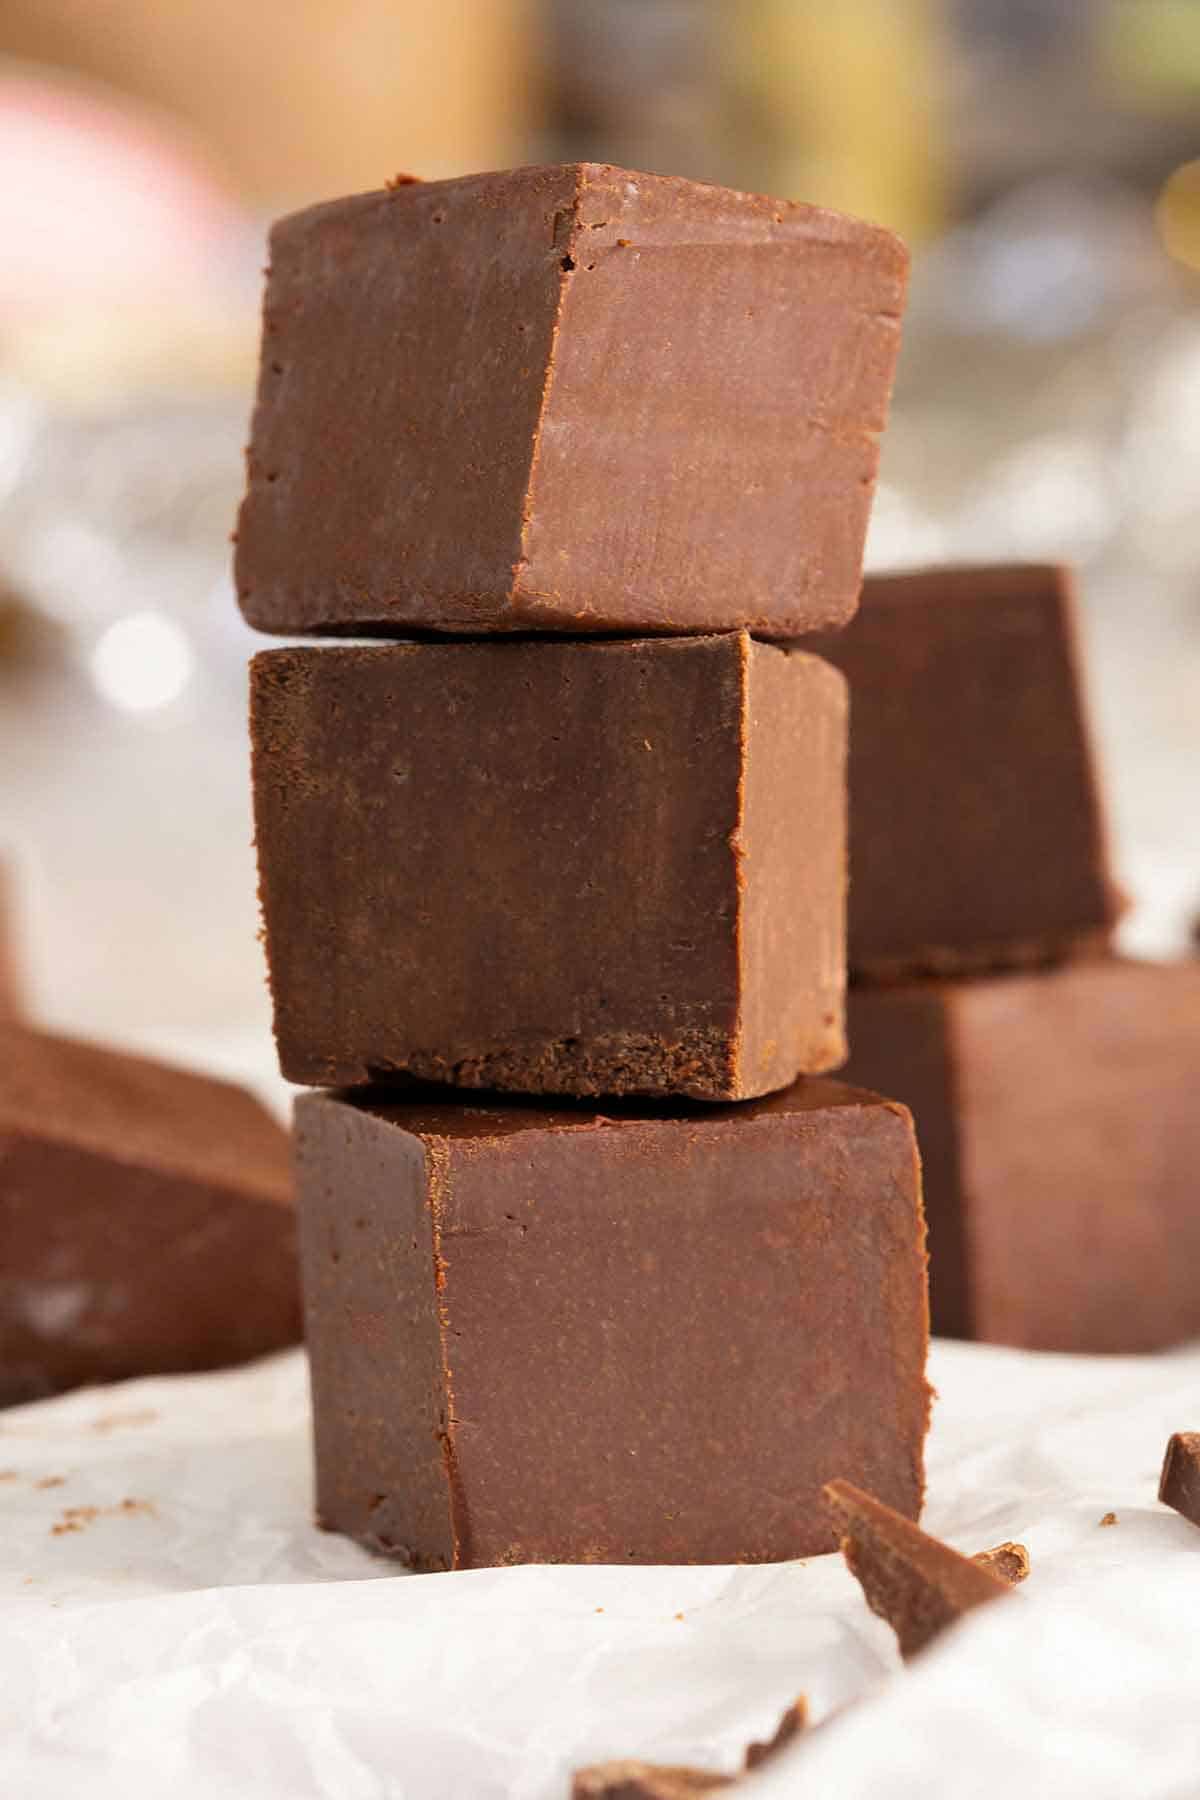 A stack of three pieces of fudge.